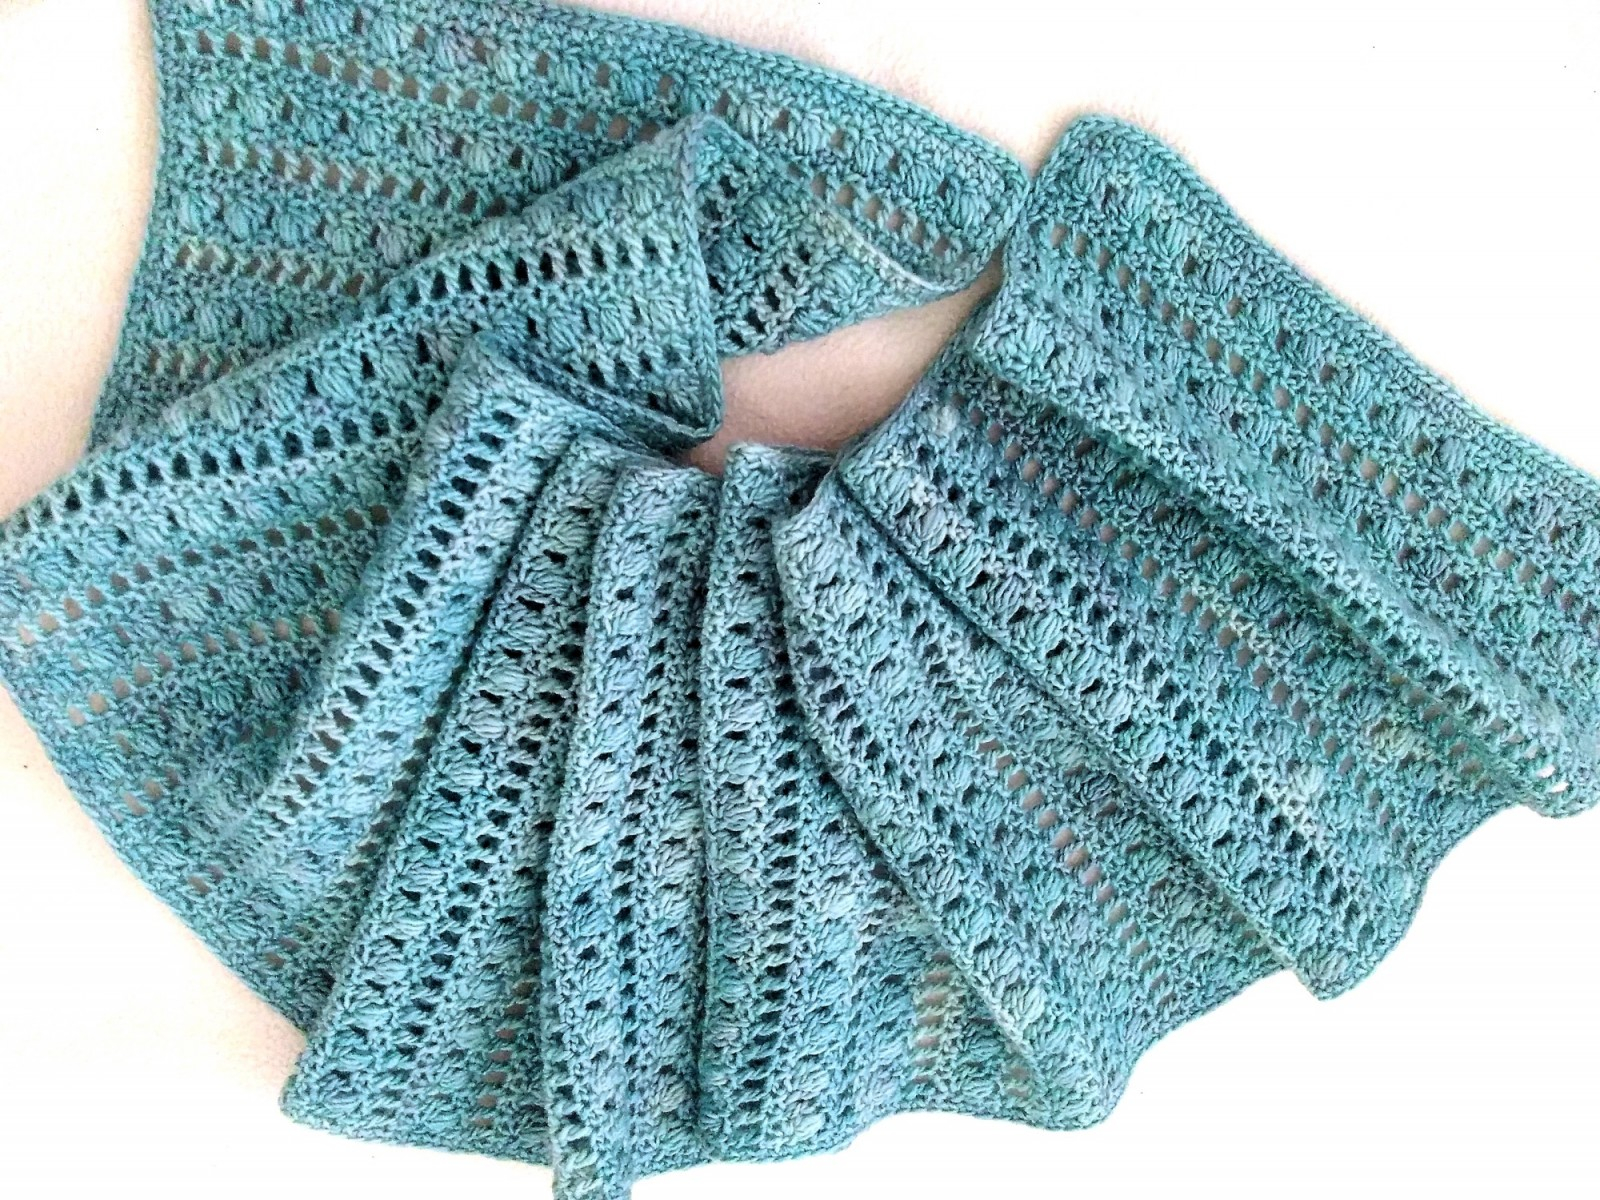 Crocheted Scarf Patterns Dreaming About Winter Crochet Scarf Pattern On Ravelry